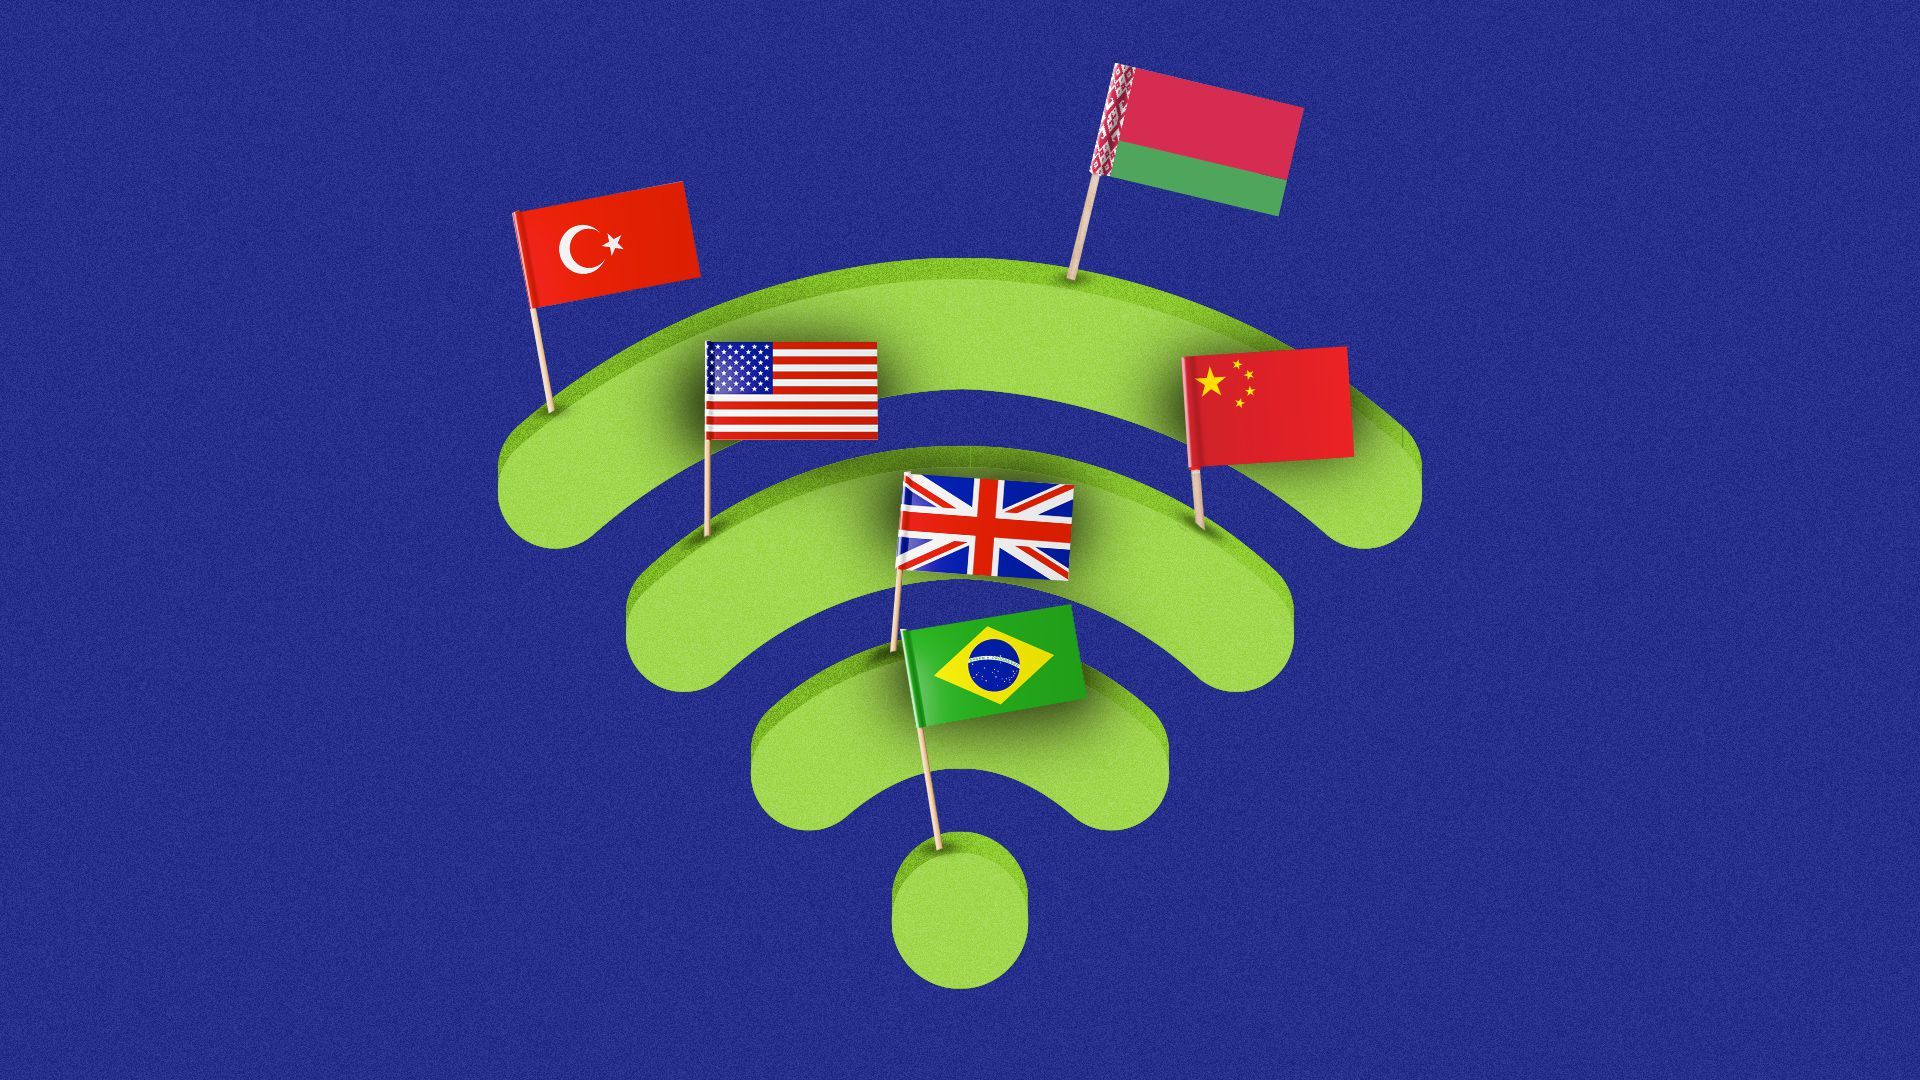 Illustration of a 3D wifi symbol with flags planted all over it. 